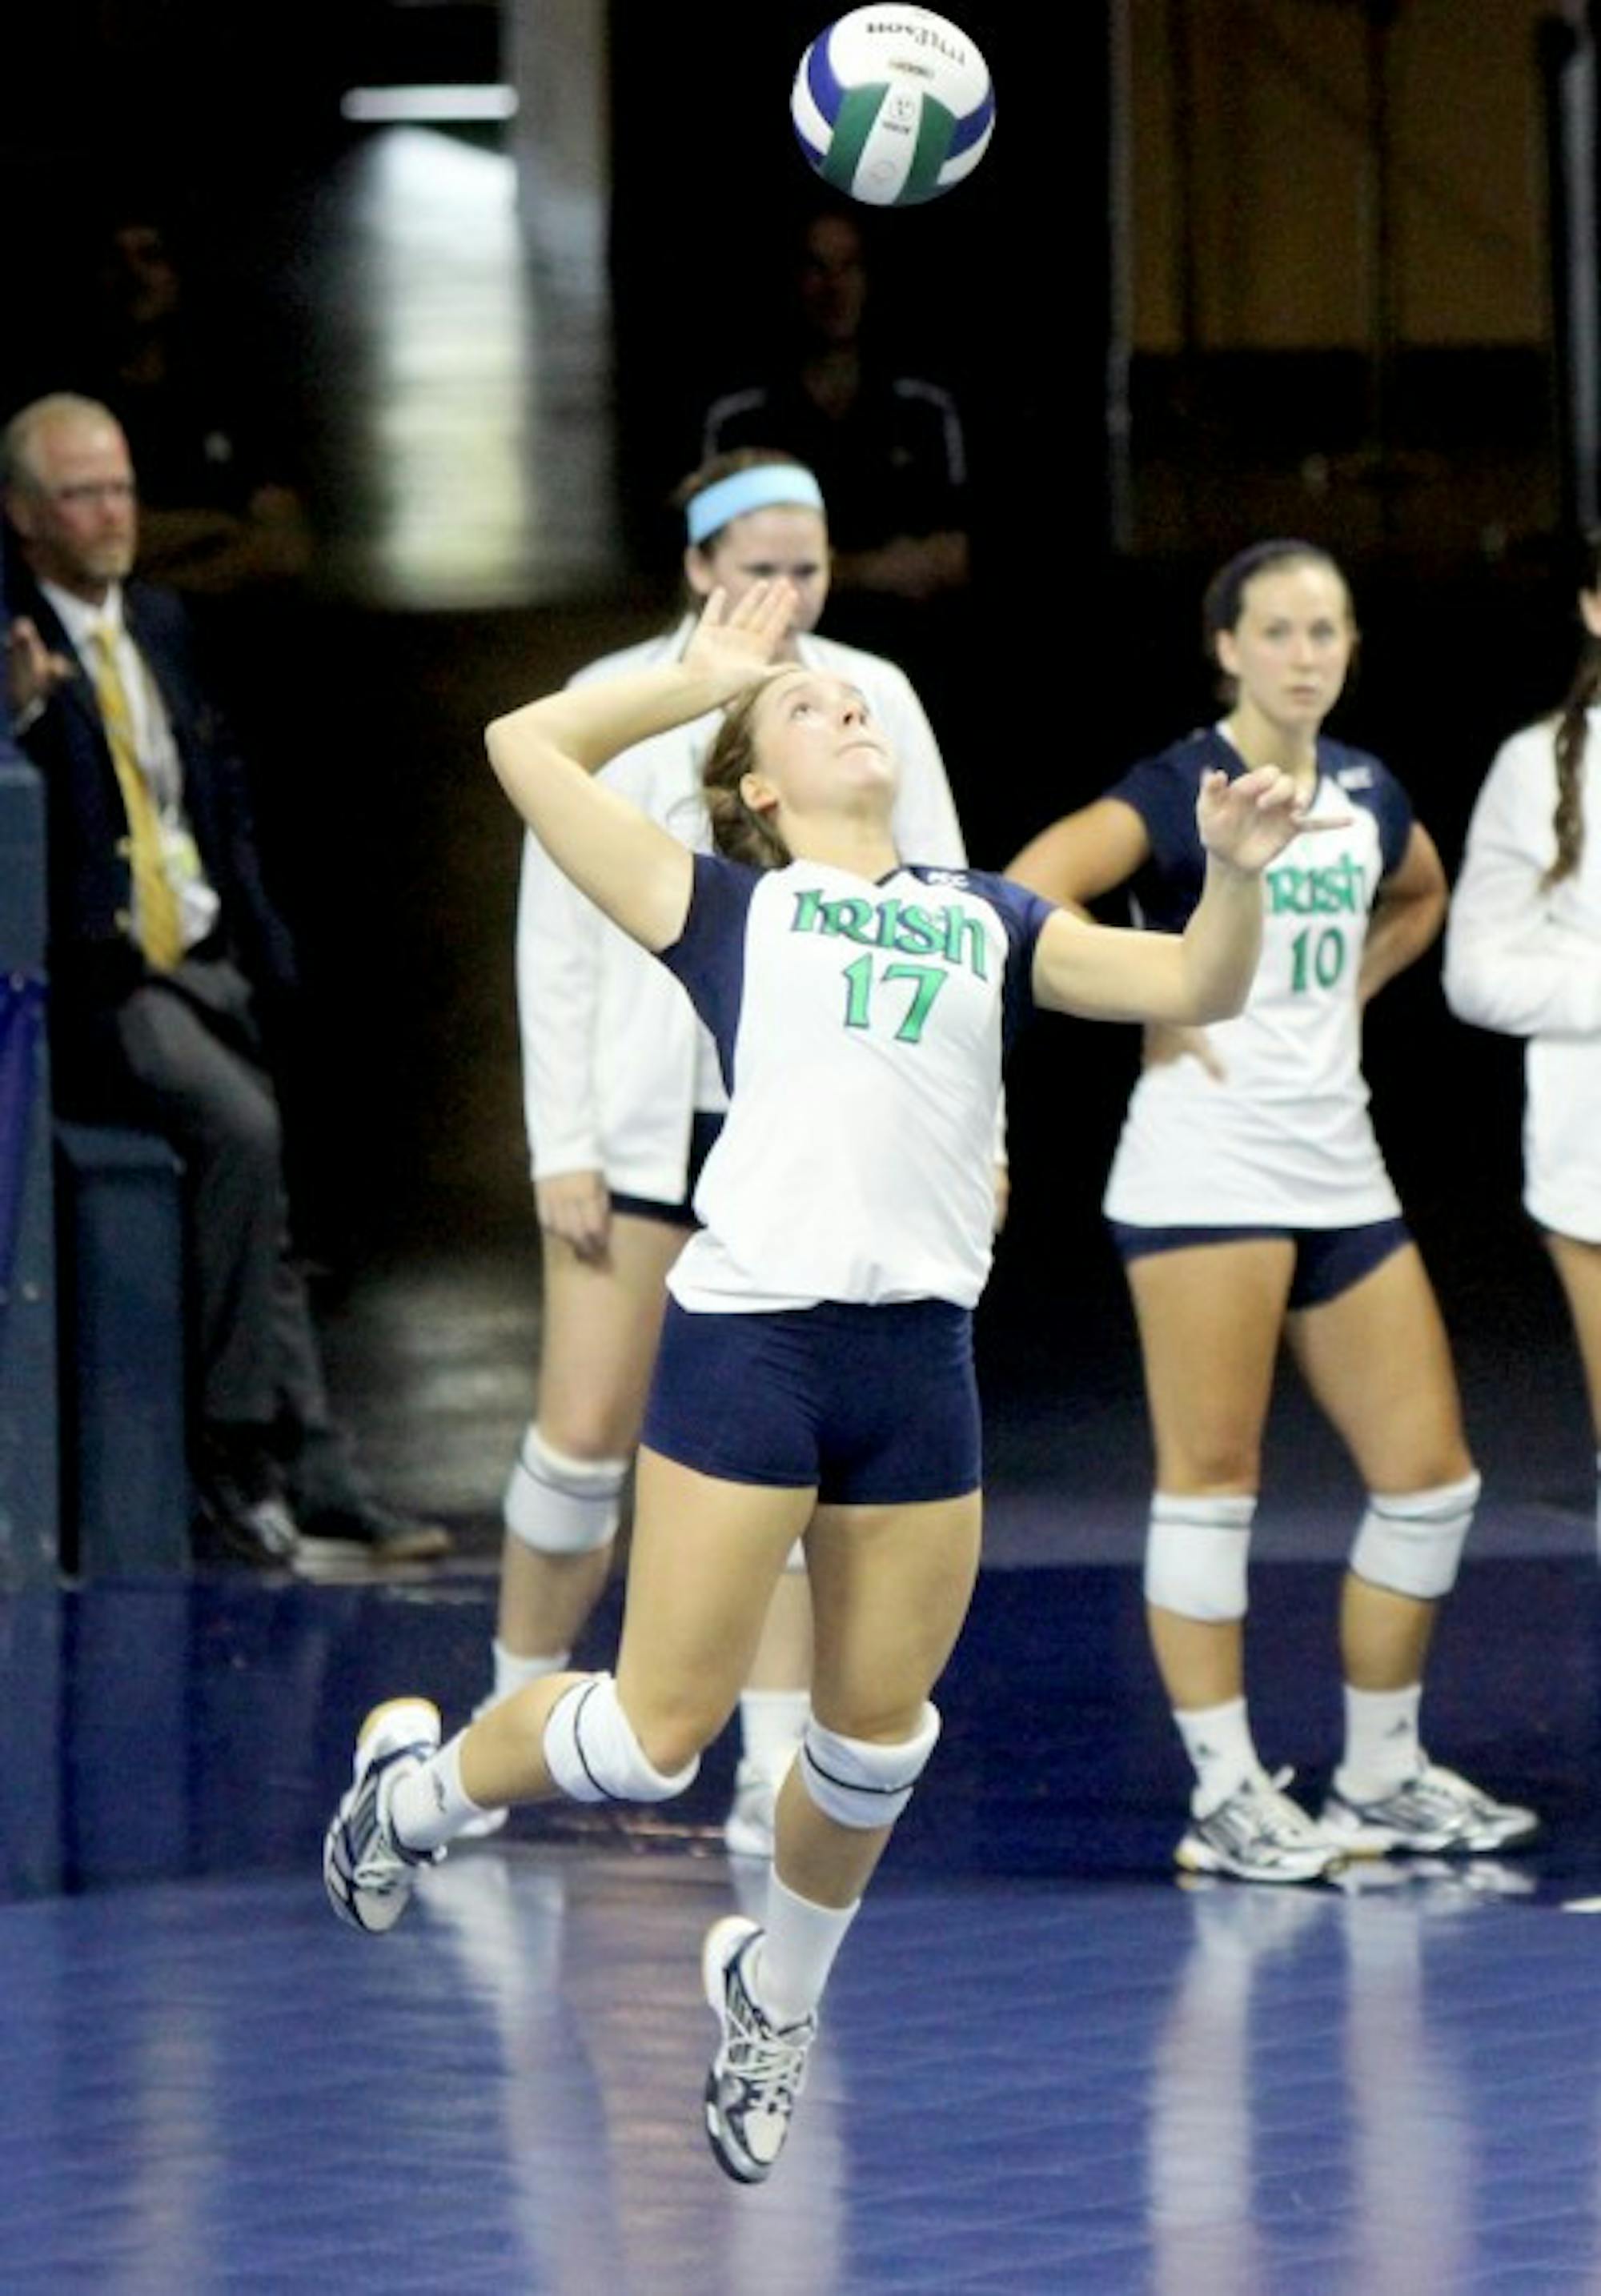 Irish senior libero Erin Klosterman goes up for a serve against Polish club team Dabrowa in an exhibition match Sept. 8, 2013 at Purcell Pavilion.